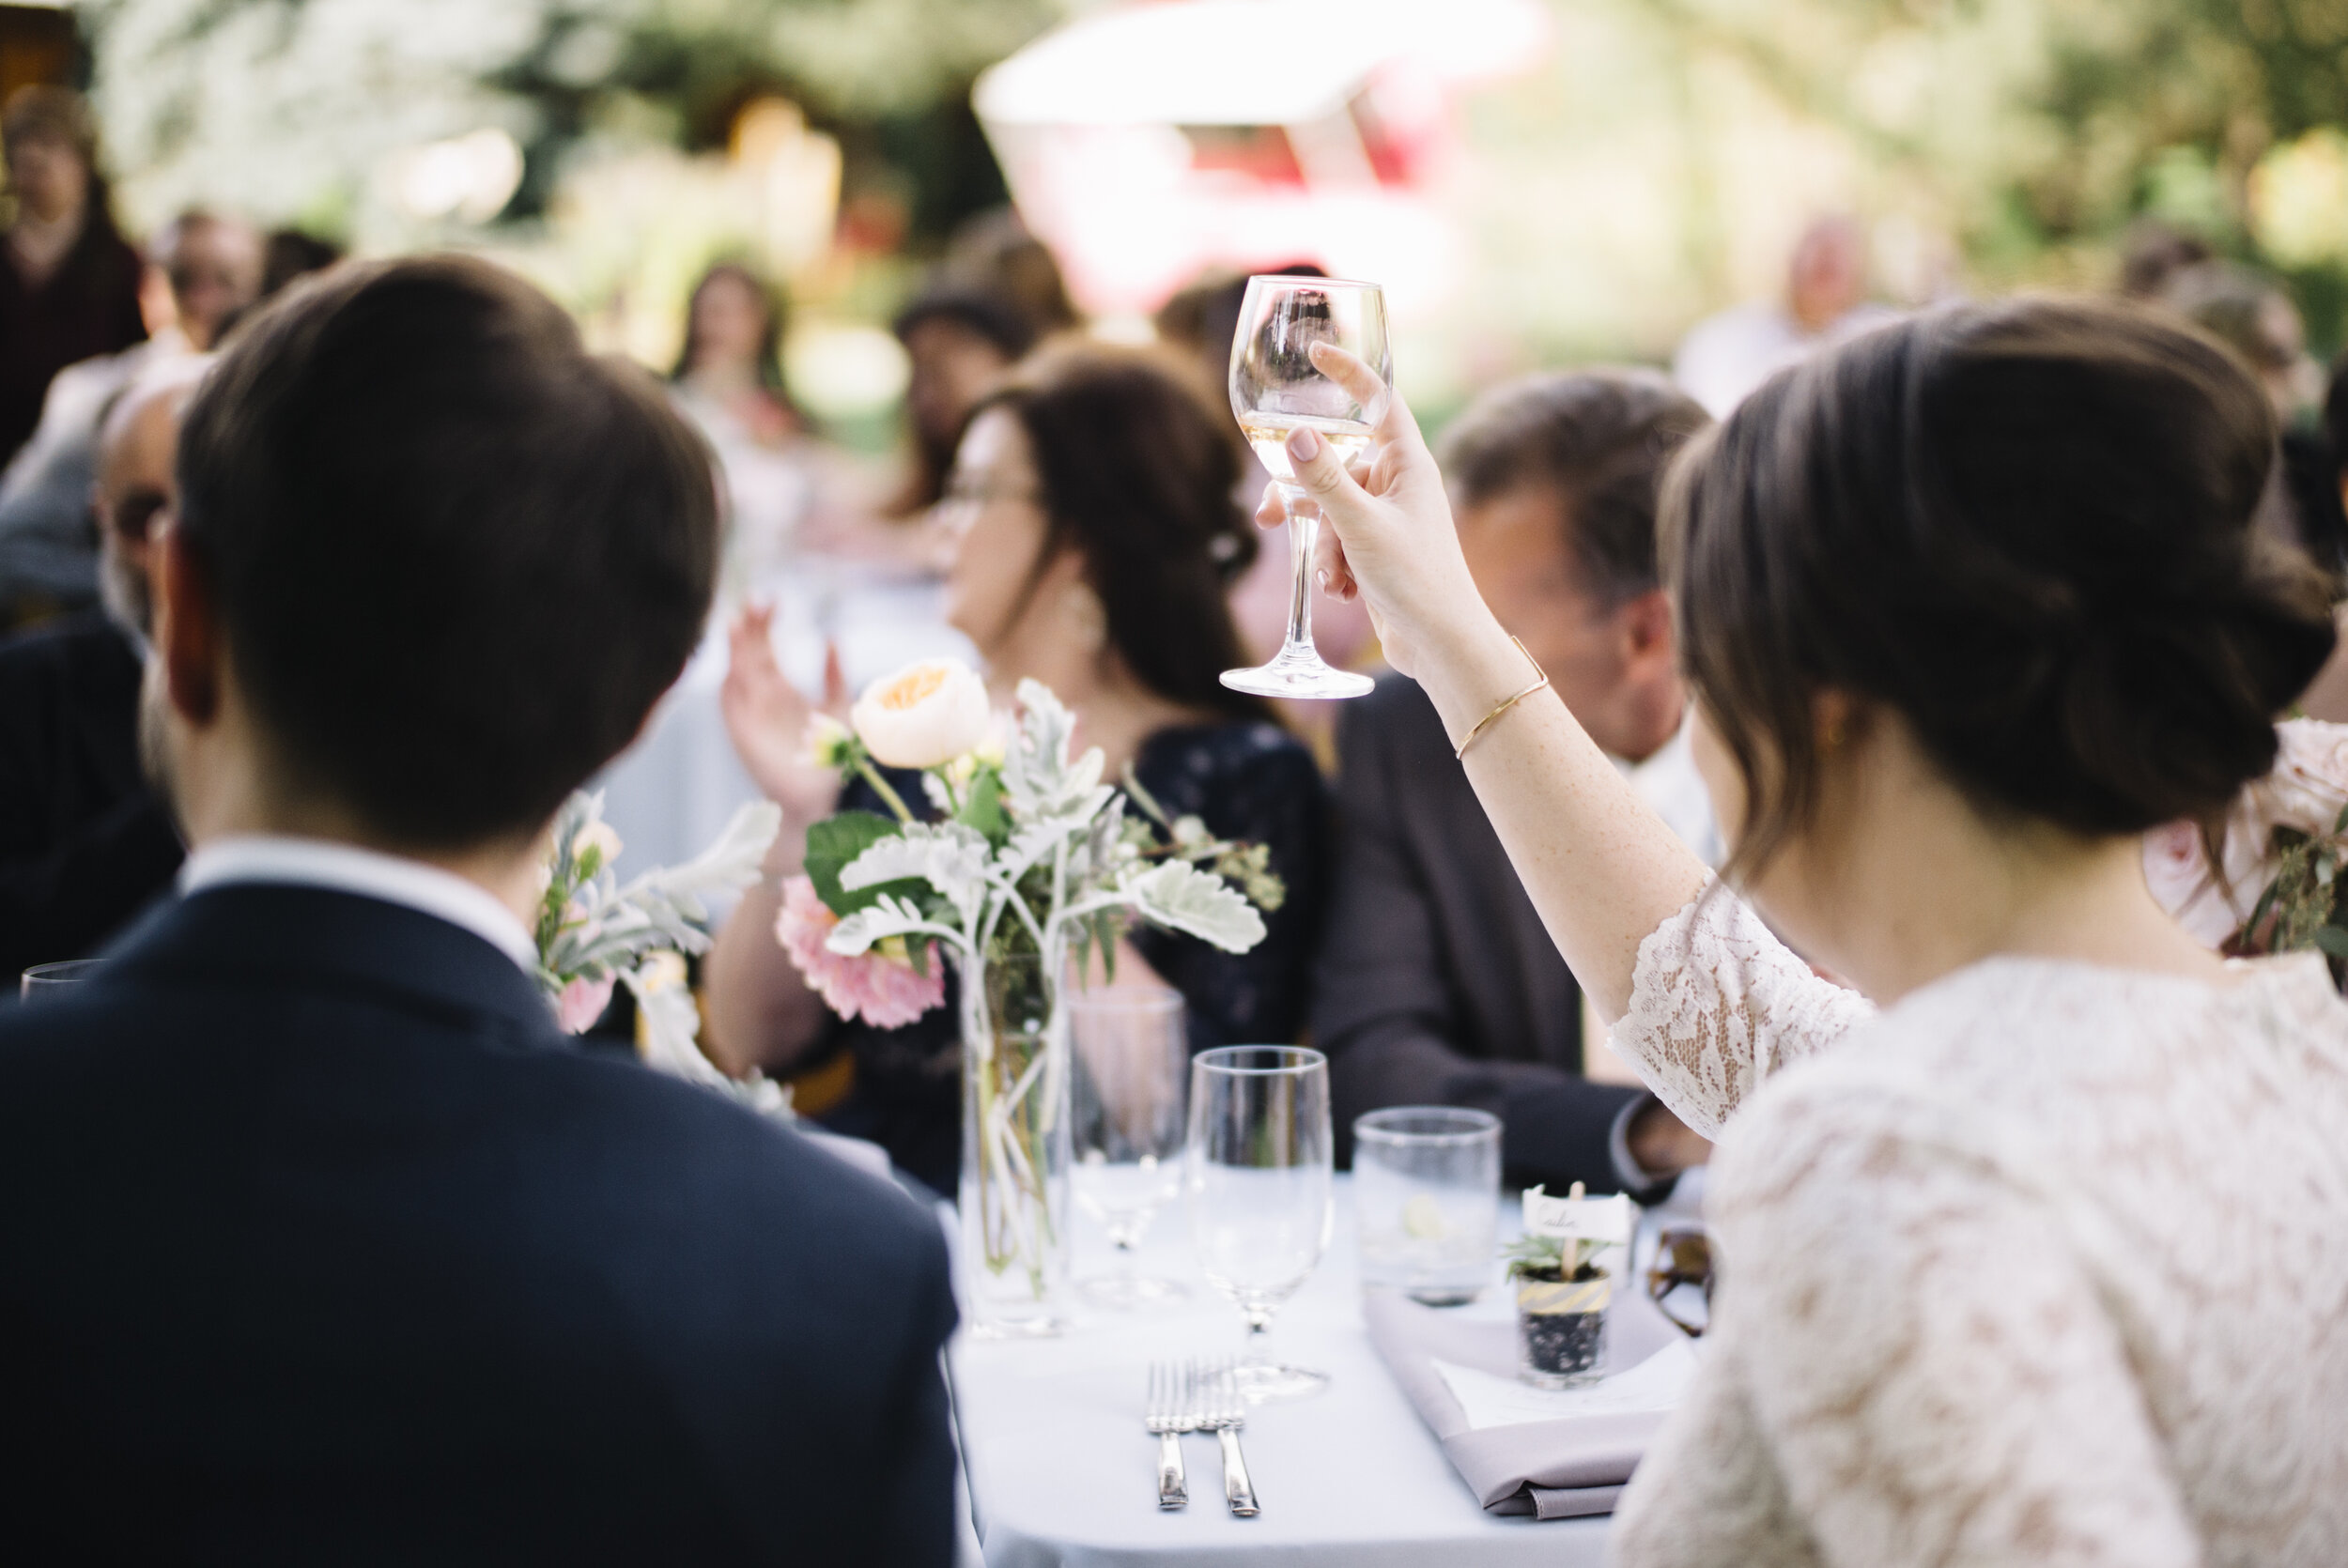 Your Complete Guide for How to Write a Wedding Speech